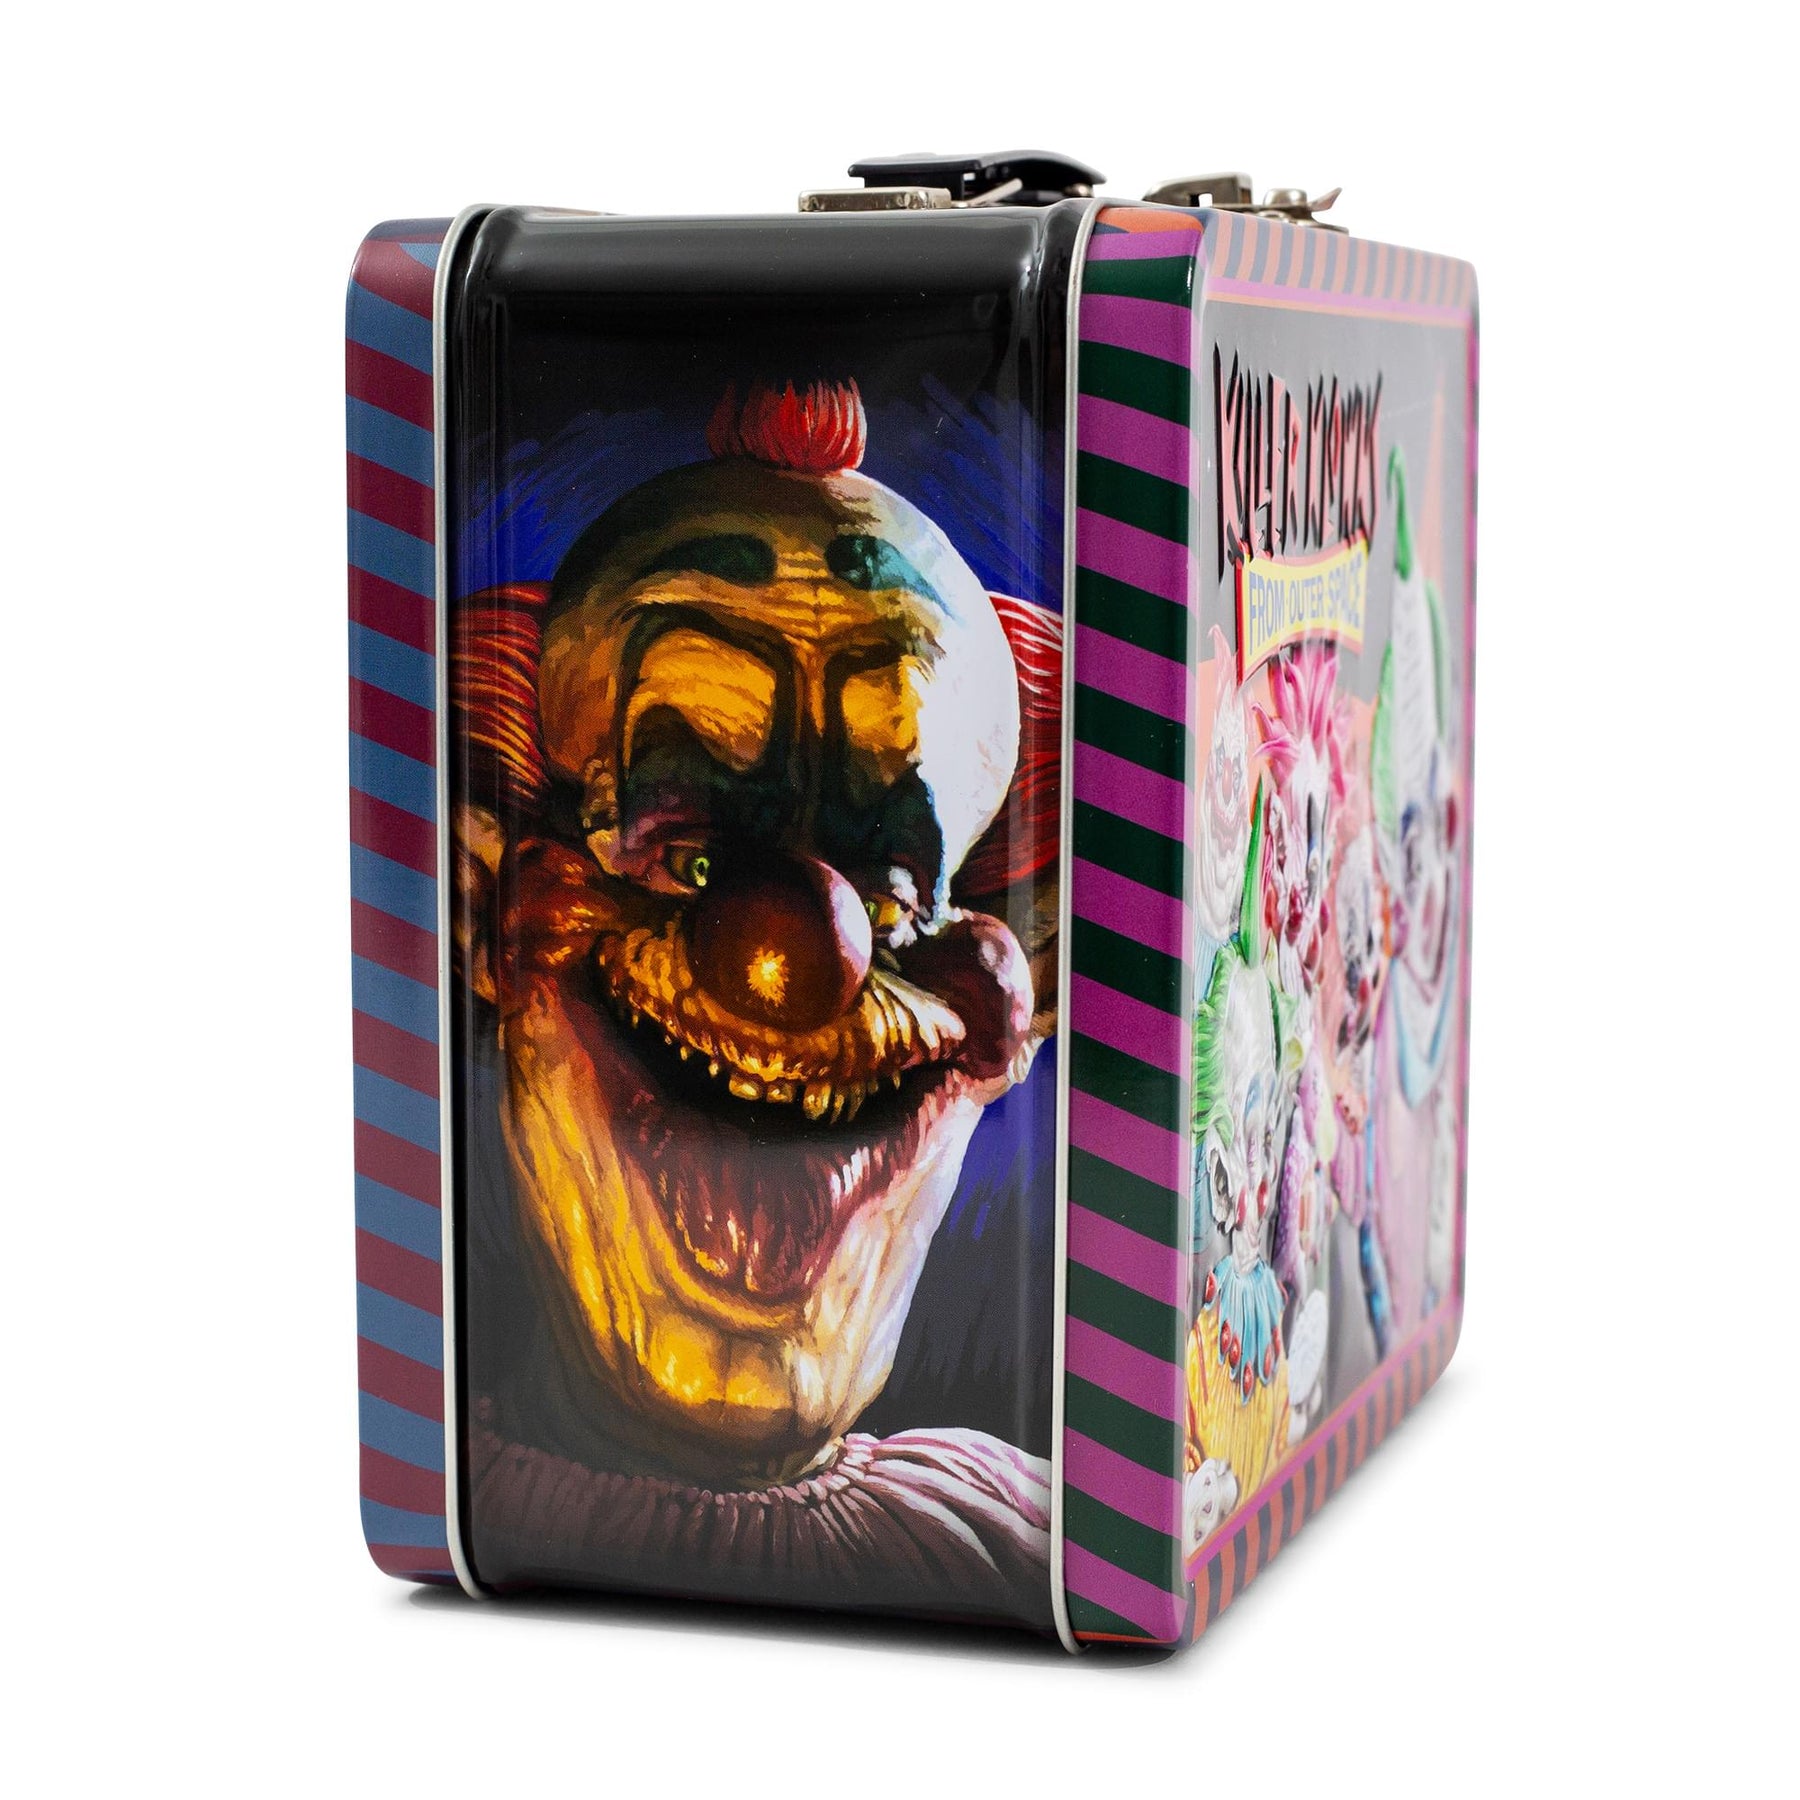 Killer Klowns From Outer Space Metal Tin Lunch Box | Toynk Exclusive